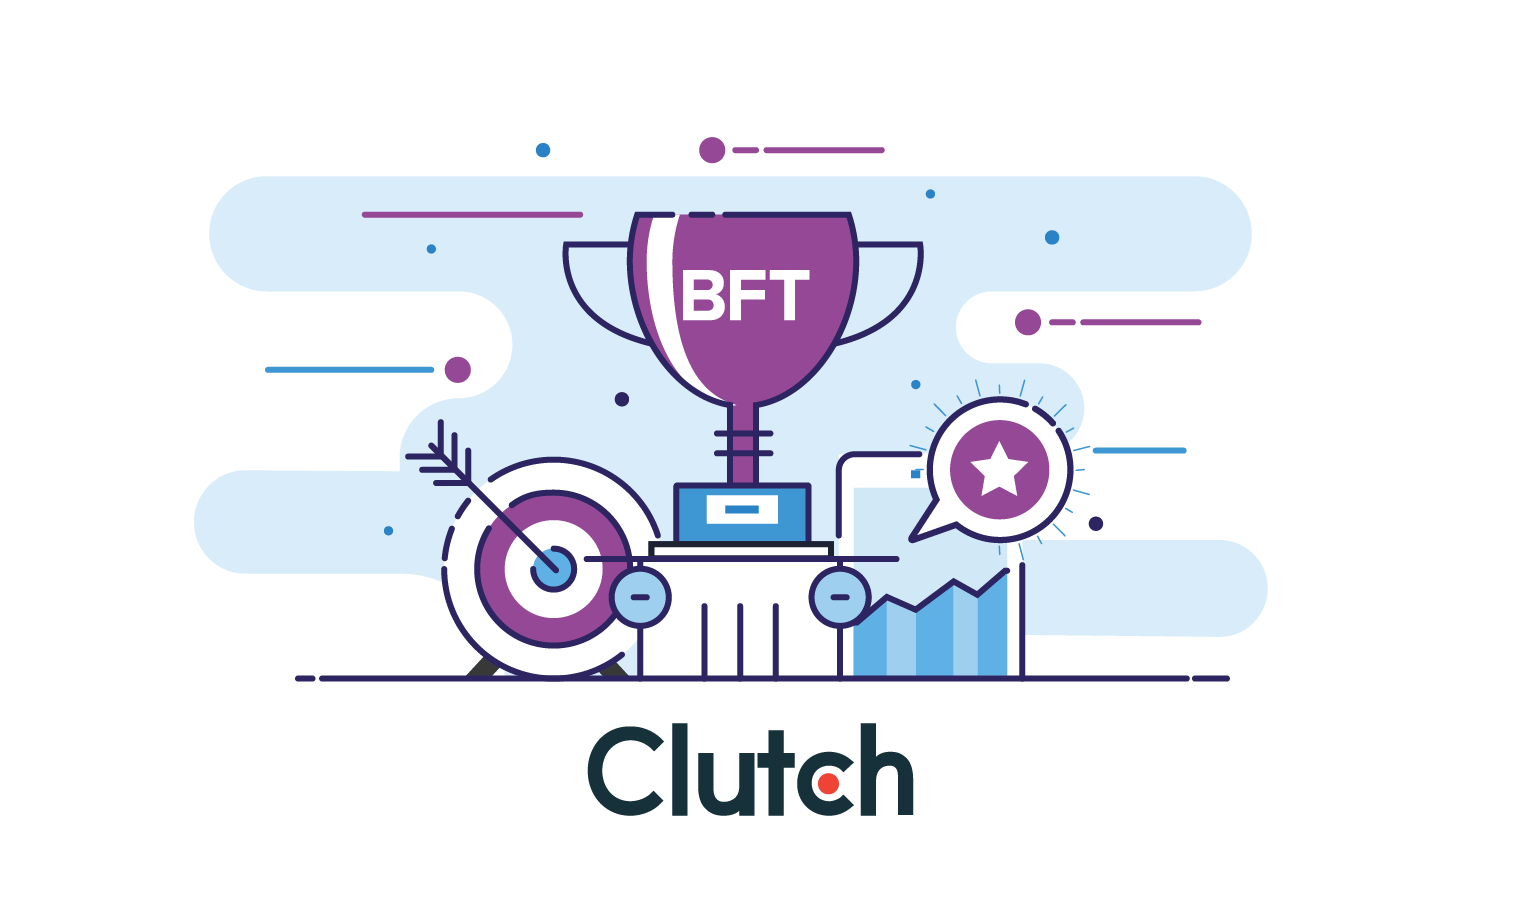 Blue Flame Thinking wins Clutch's BFT Recognized as Leading B2B Agency